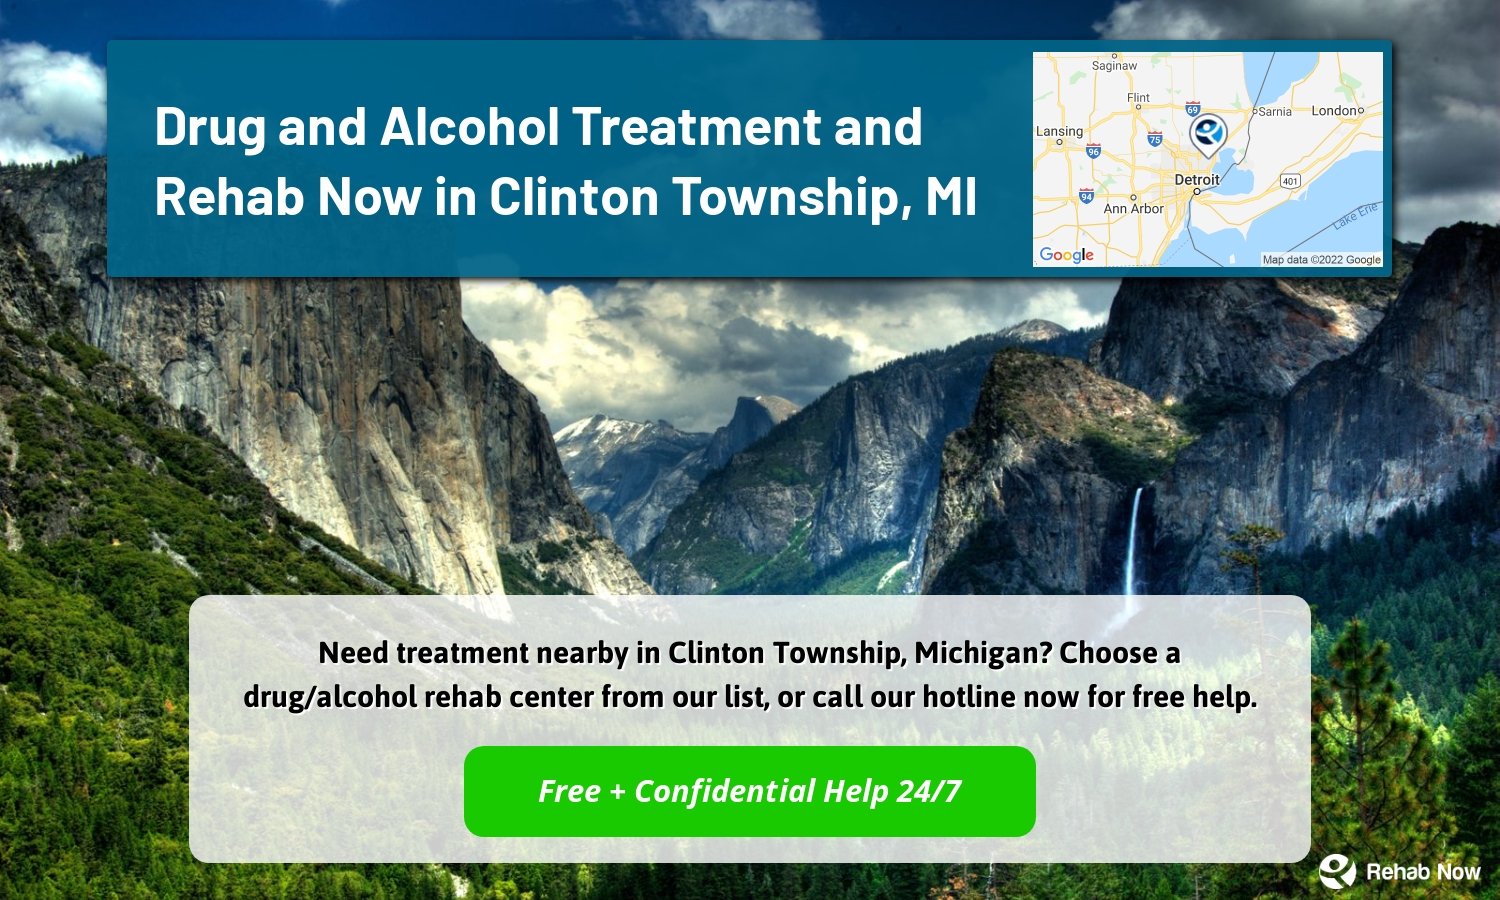 Need treatment nearby in Clinton Township, Michigan? Choose a drug/alcohol rehab center from our list, or call our hotline now for free help.